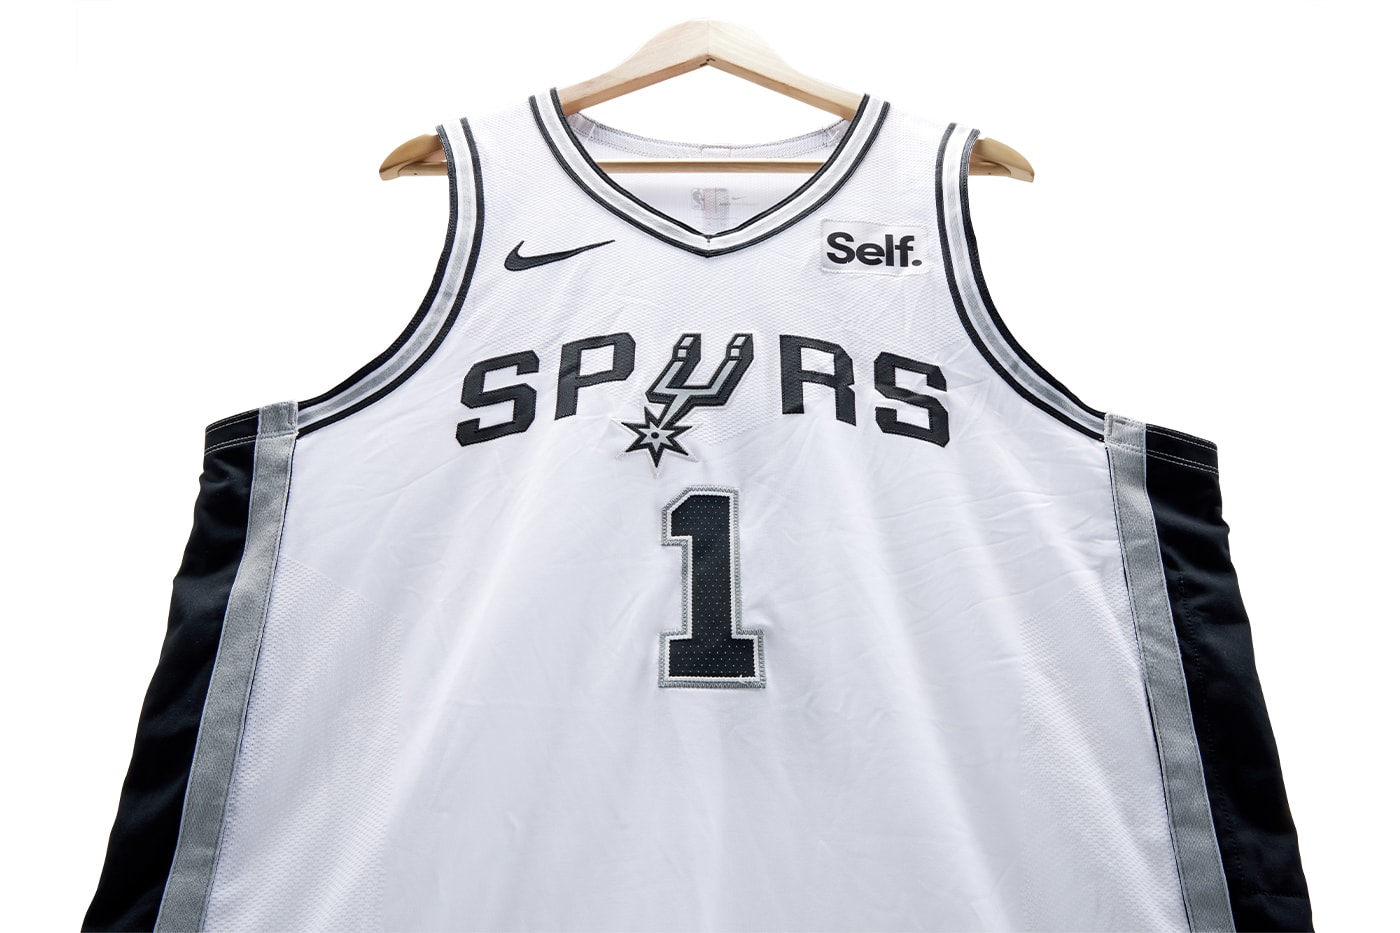 Victor Wembanyama's Rookie Debut Game Jersey Smashes Pre-Sale Estimates, Sells for $762,000 USD sotheby's auction nba basketball san antonio spurs french france